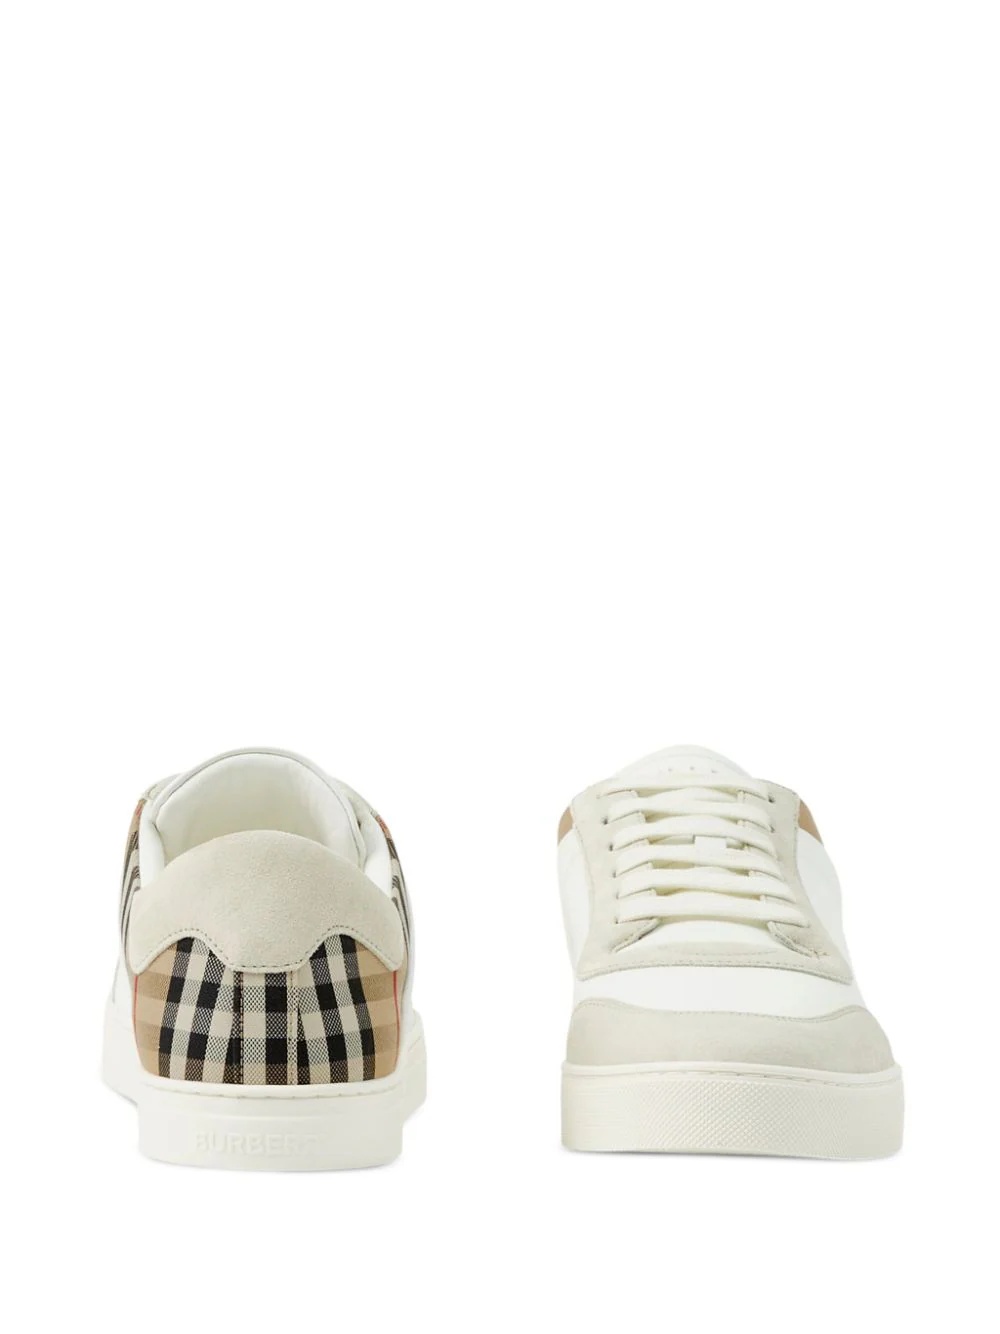 BURBERRY Men Vintage Check Panelled Sneakers - 4